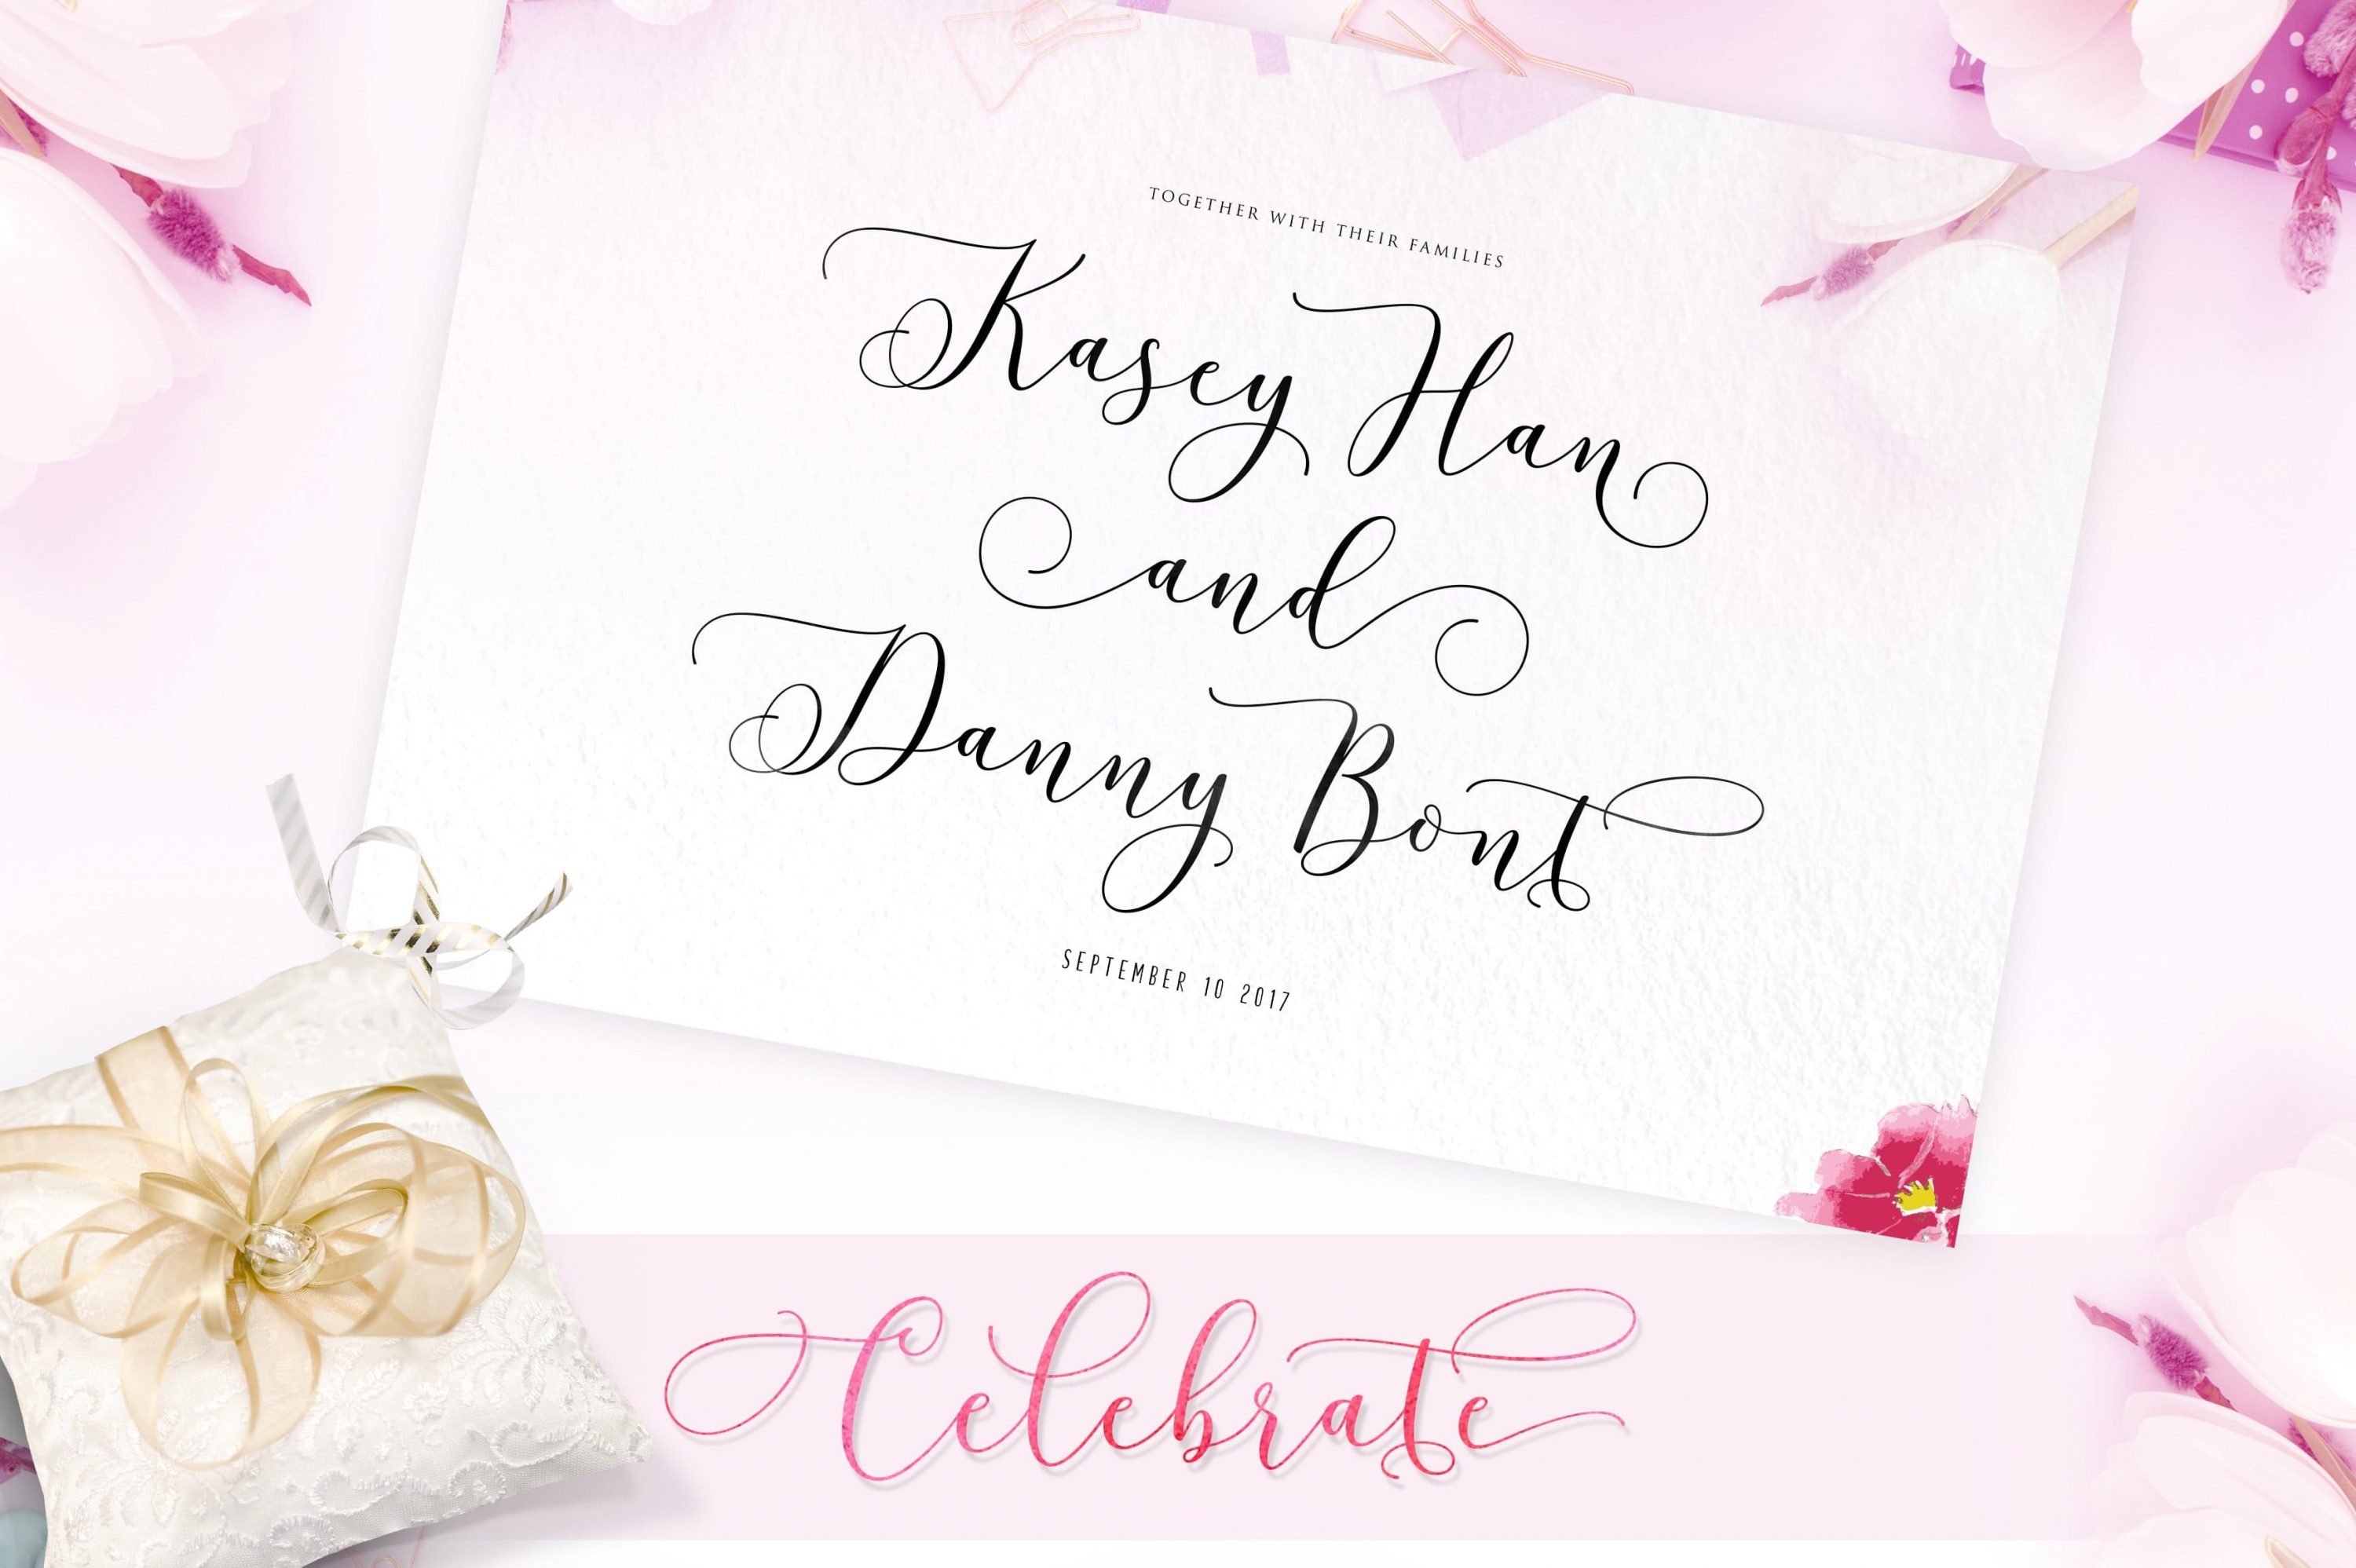 Wedding invitations by this cute font.